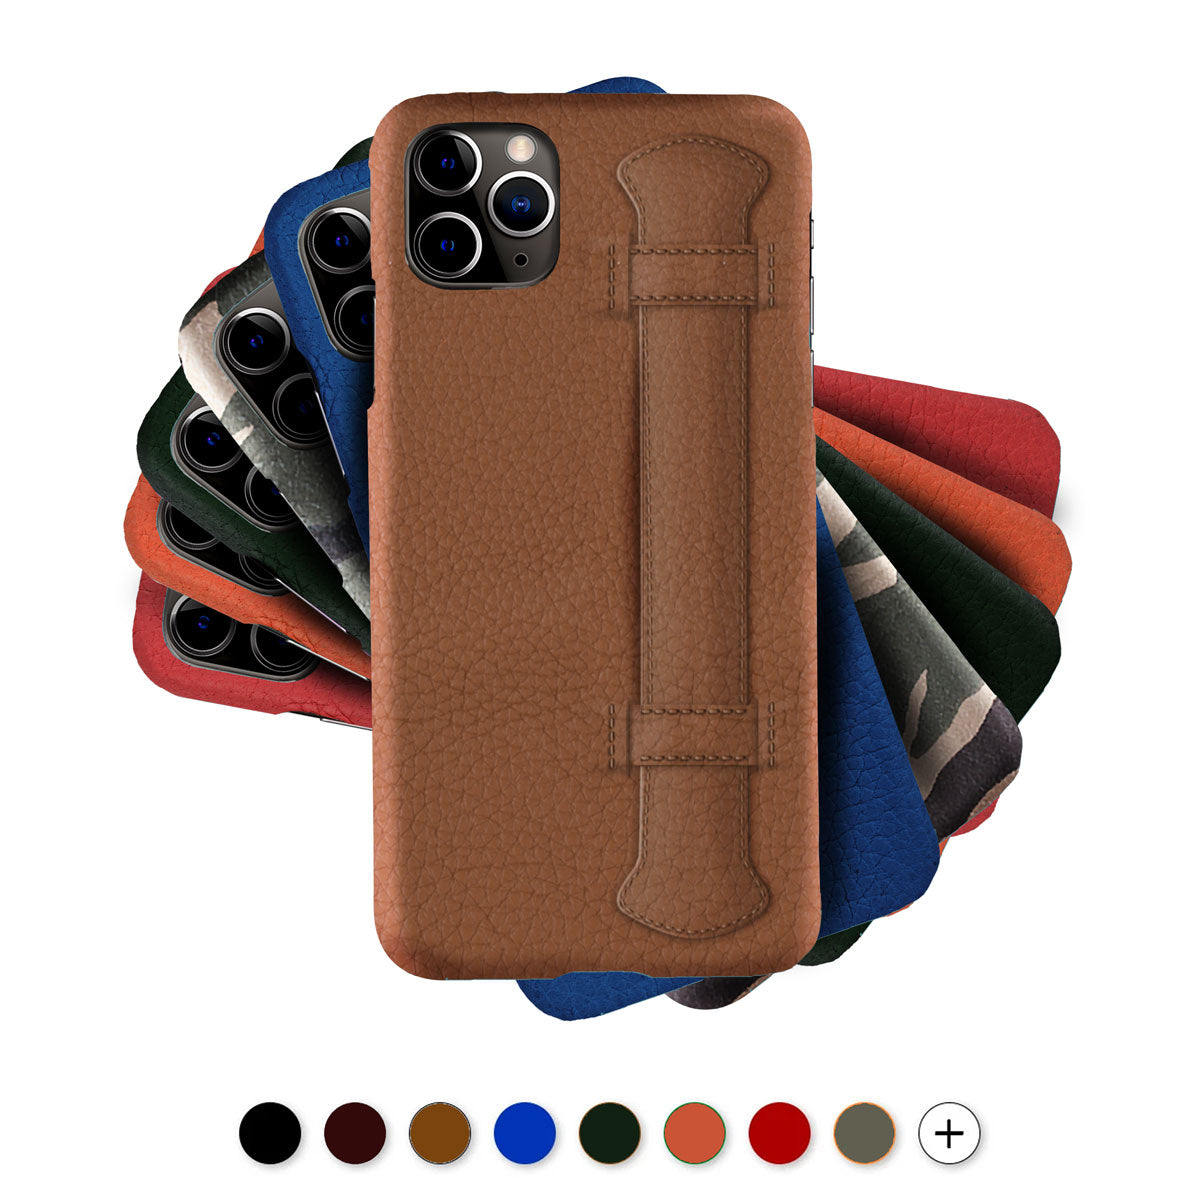 Leather iPhone case "Strap case" - iPhone 12 & 11 ( Pro / Max / Mini ) - Buffalo leather , black , Dark brown , blue , red...